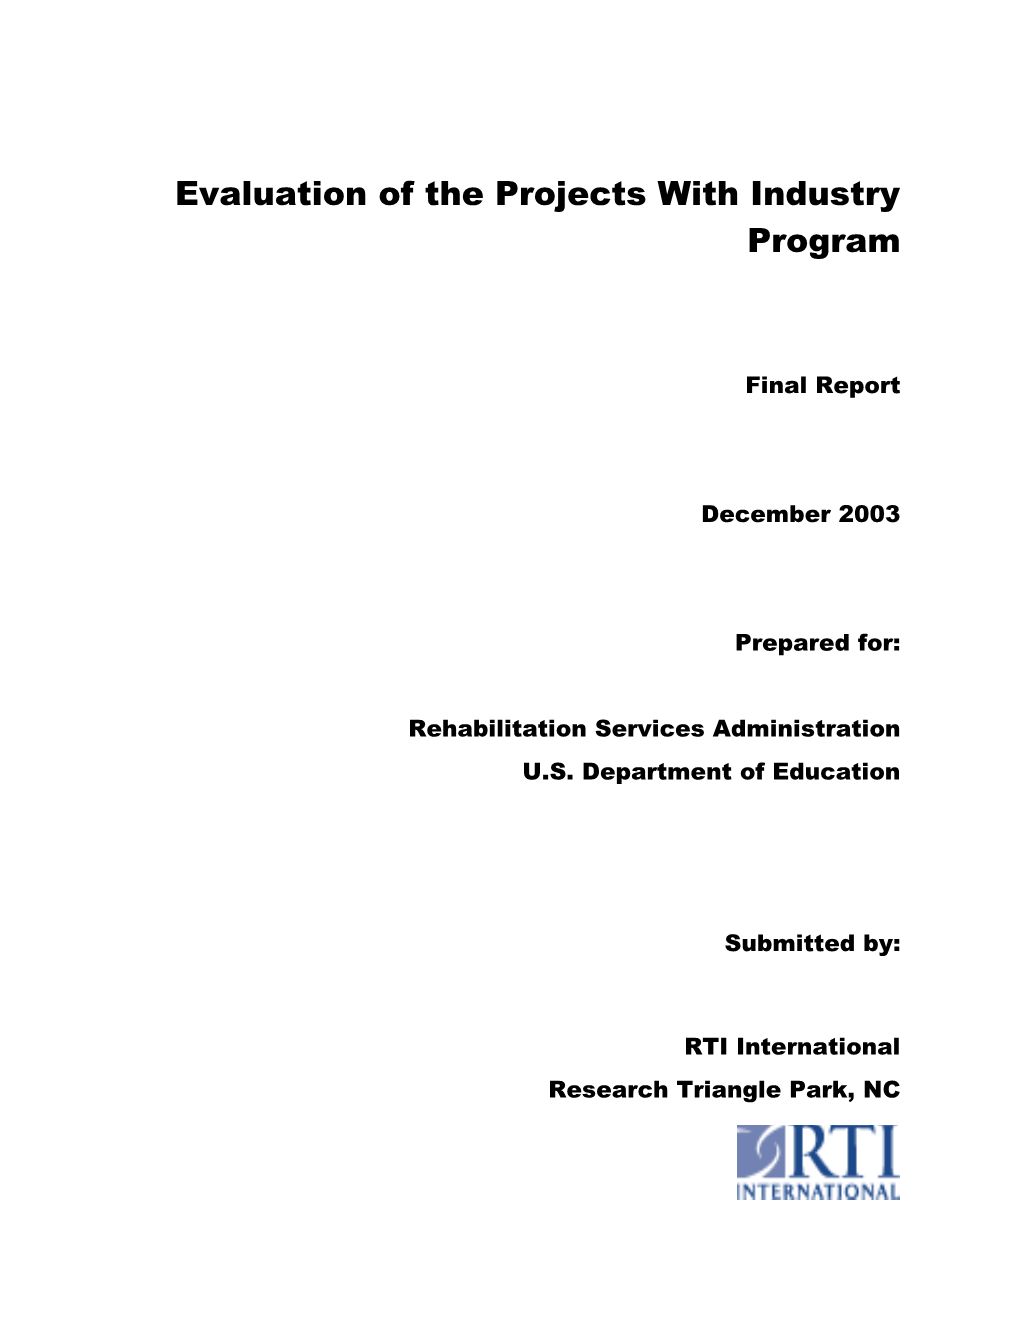 Evaluation of the Projects with Industry Program: Final Report